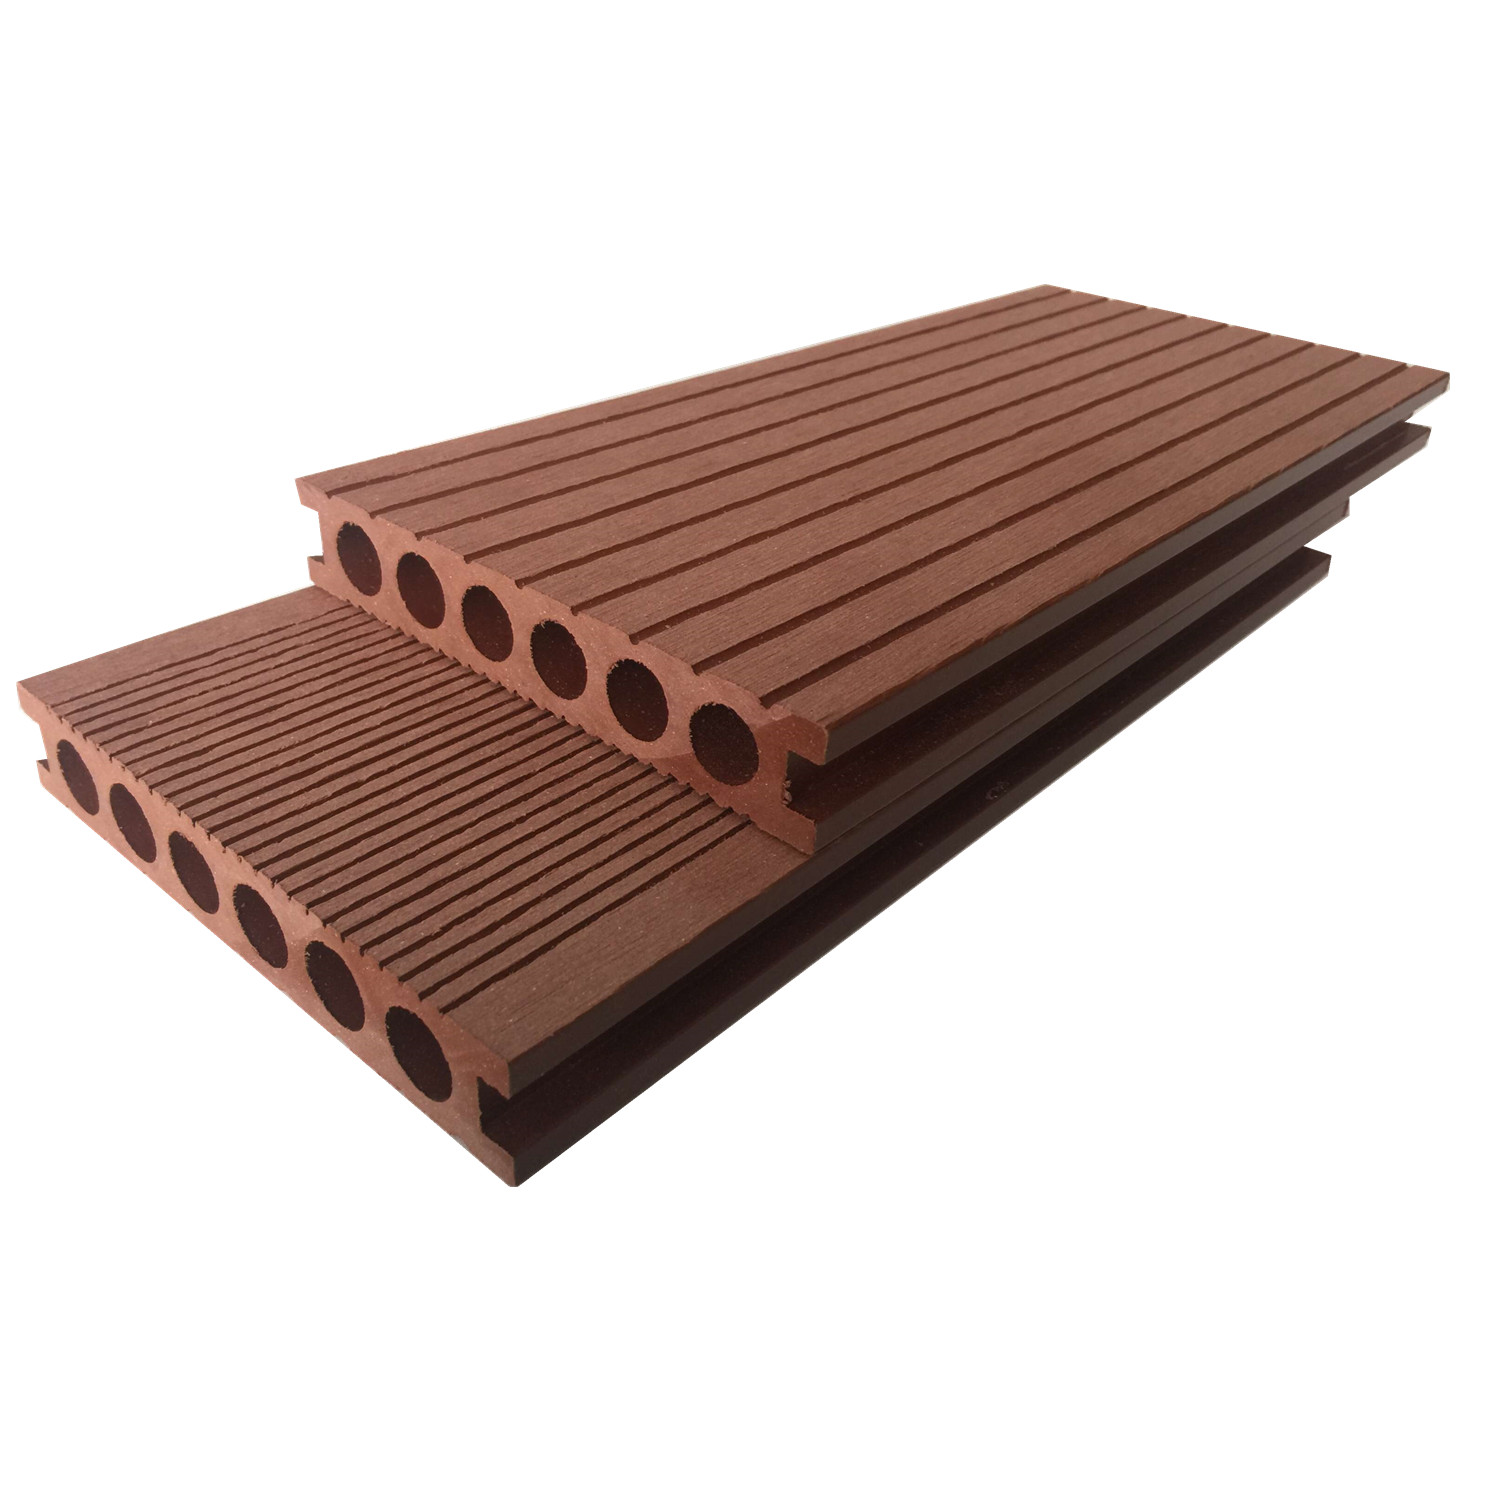 140H32 WPC decking wood plastic composite decking flooring outdoor use